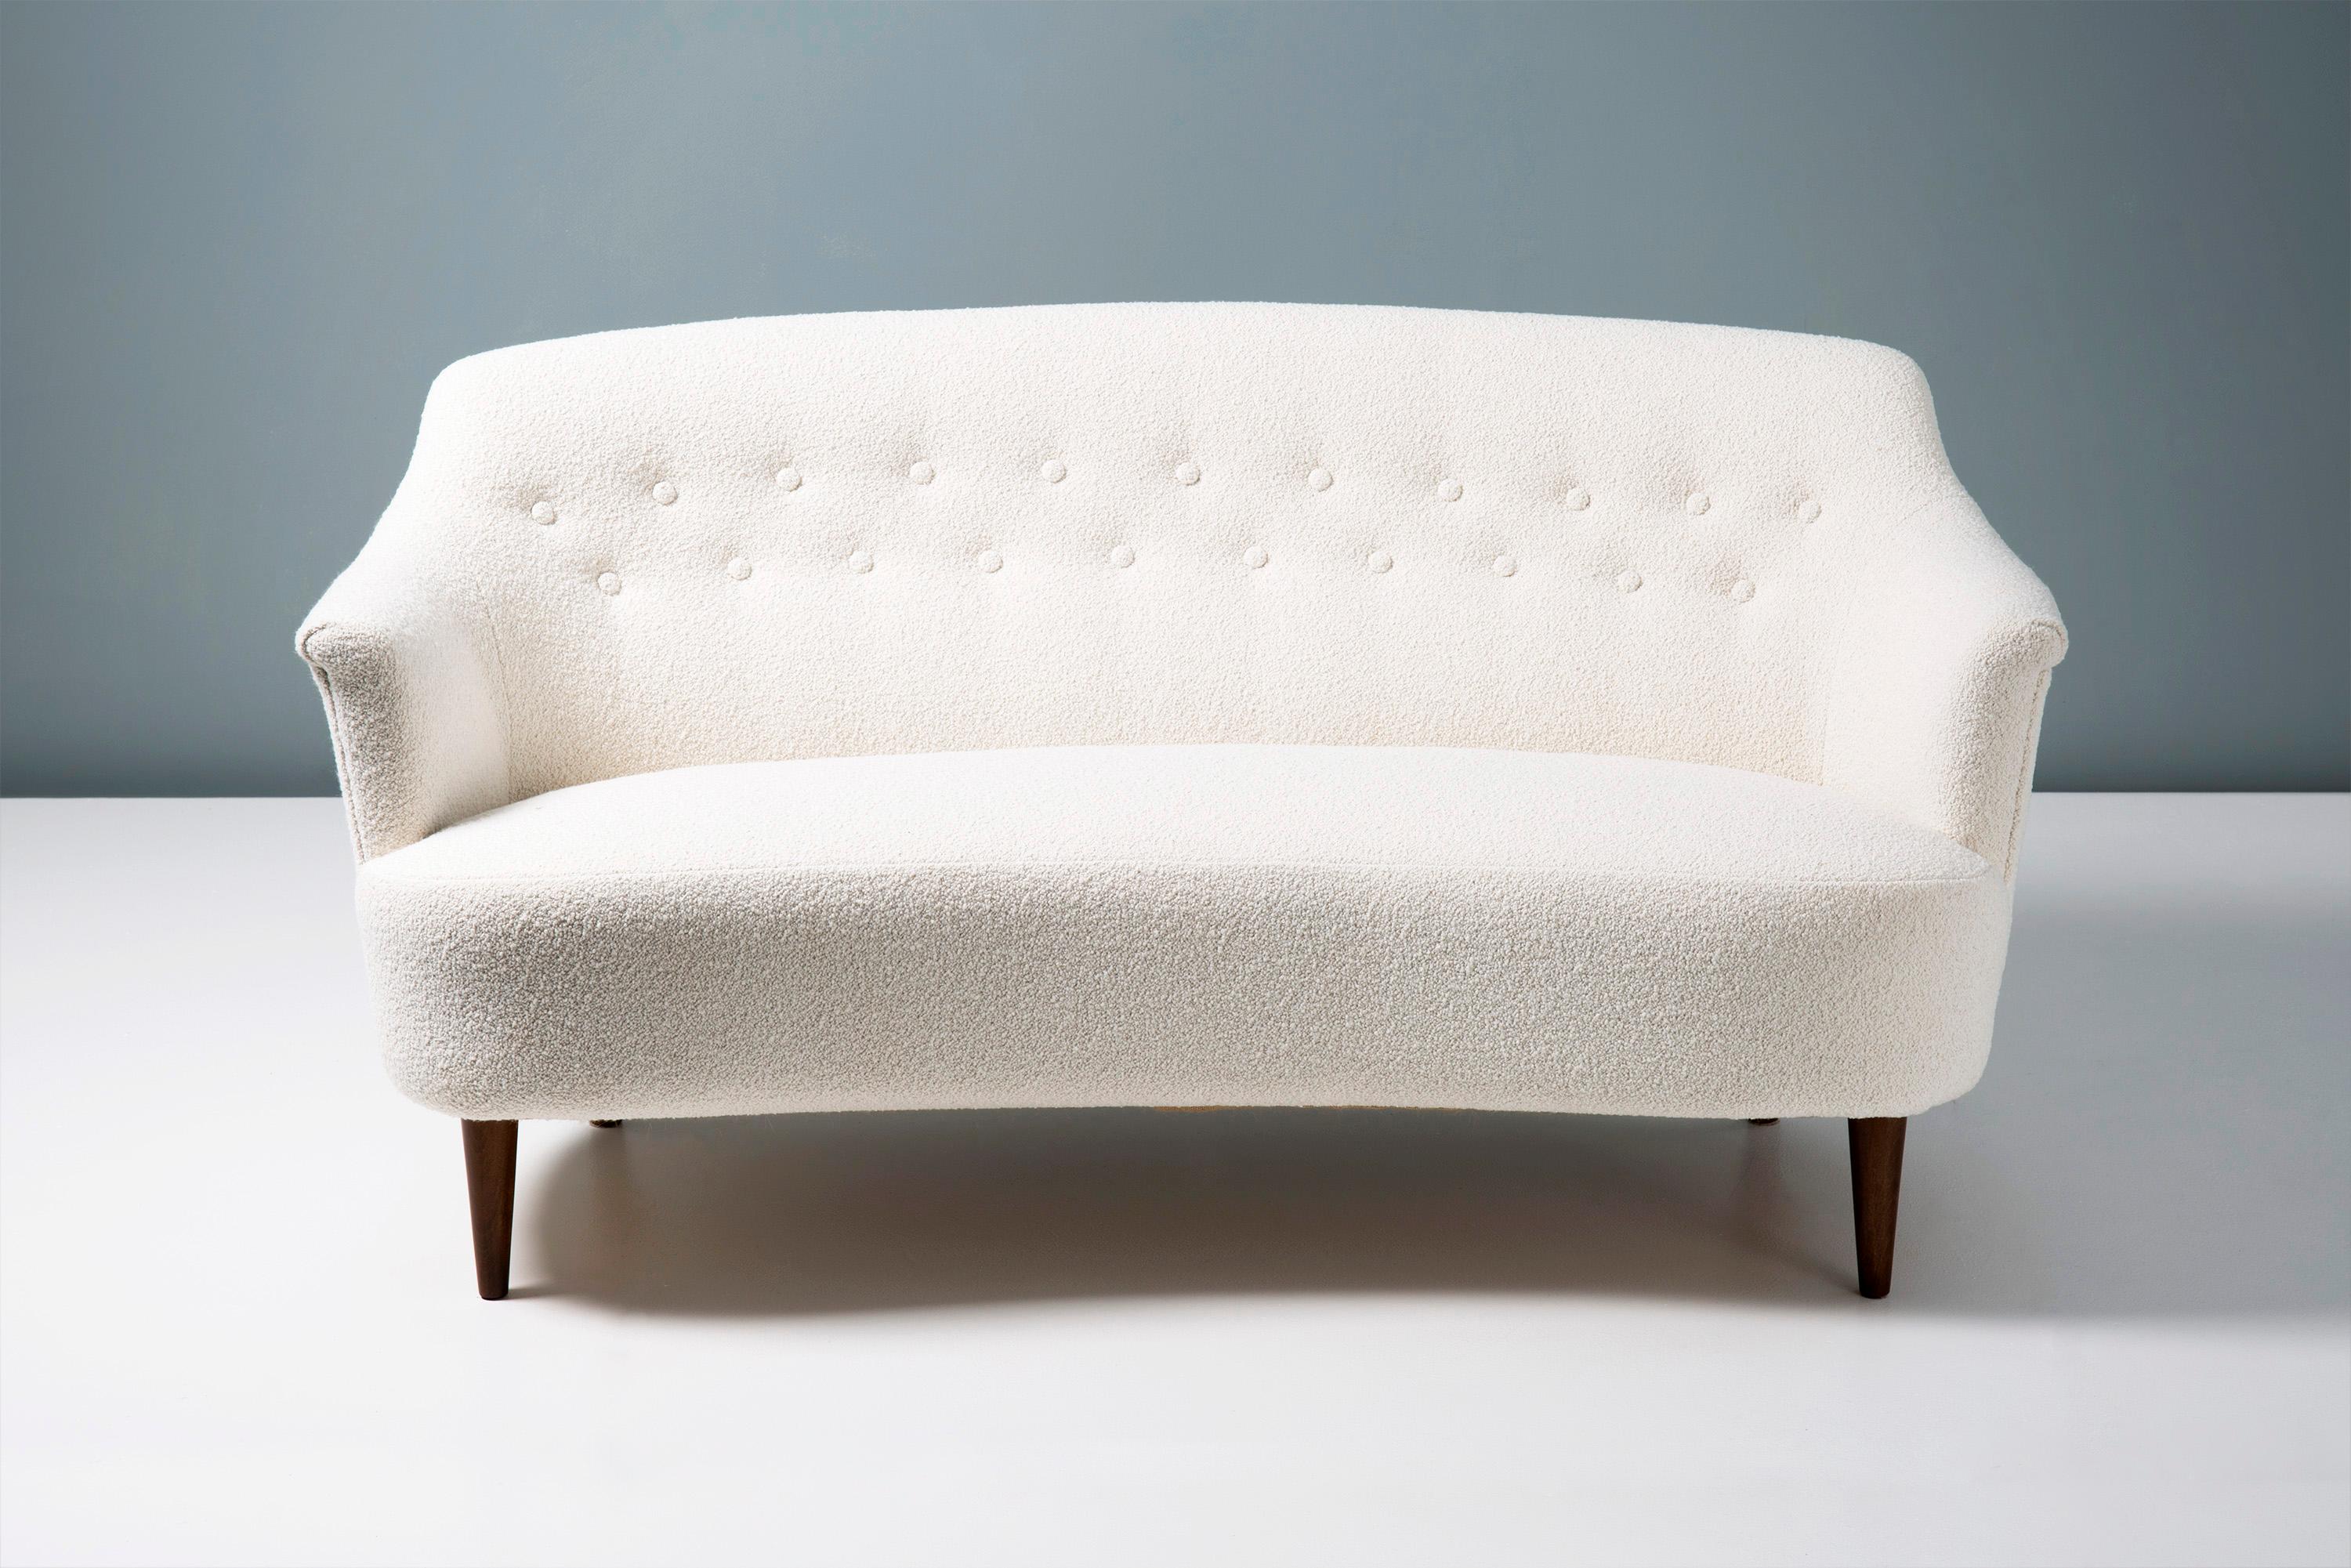 This exceptional piece of Swedish furniture was designed in the 1940s by master cabinetmaker and designer Carl Malmsten. It was produced at his own workshop near Stockholm in Sweden. This example has been reupholstered in luxurious cotton-wool blend